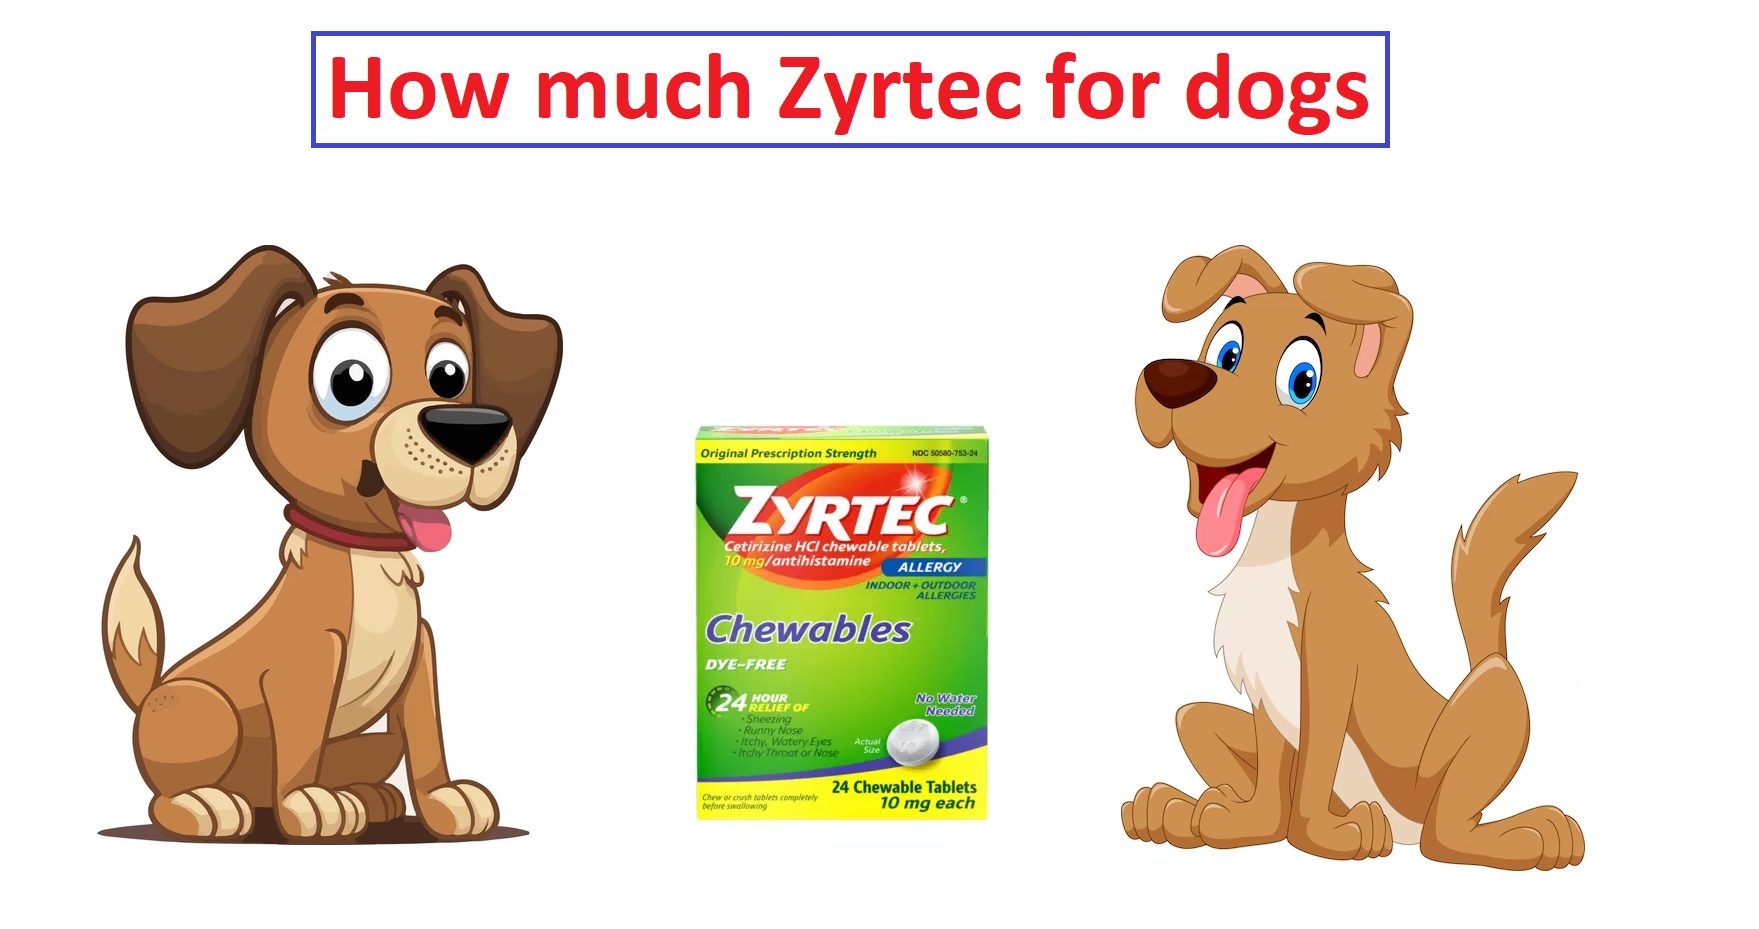 How much is Zyrtec for dogs?